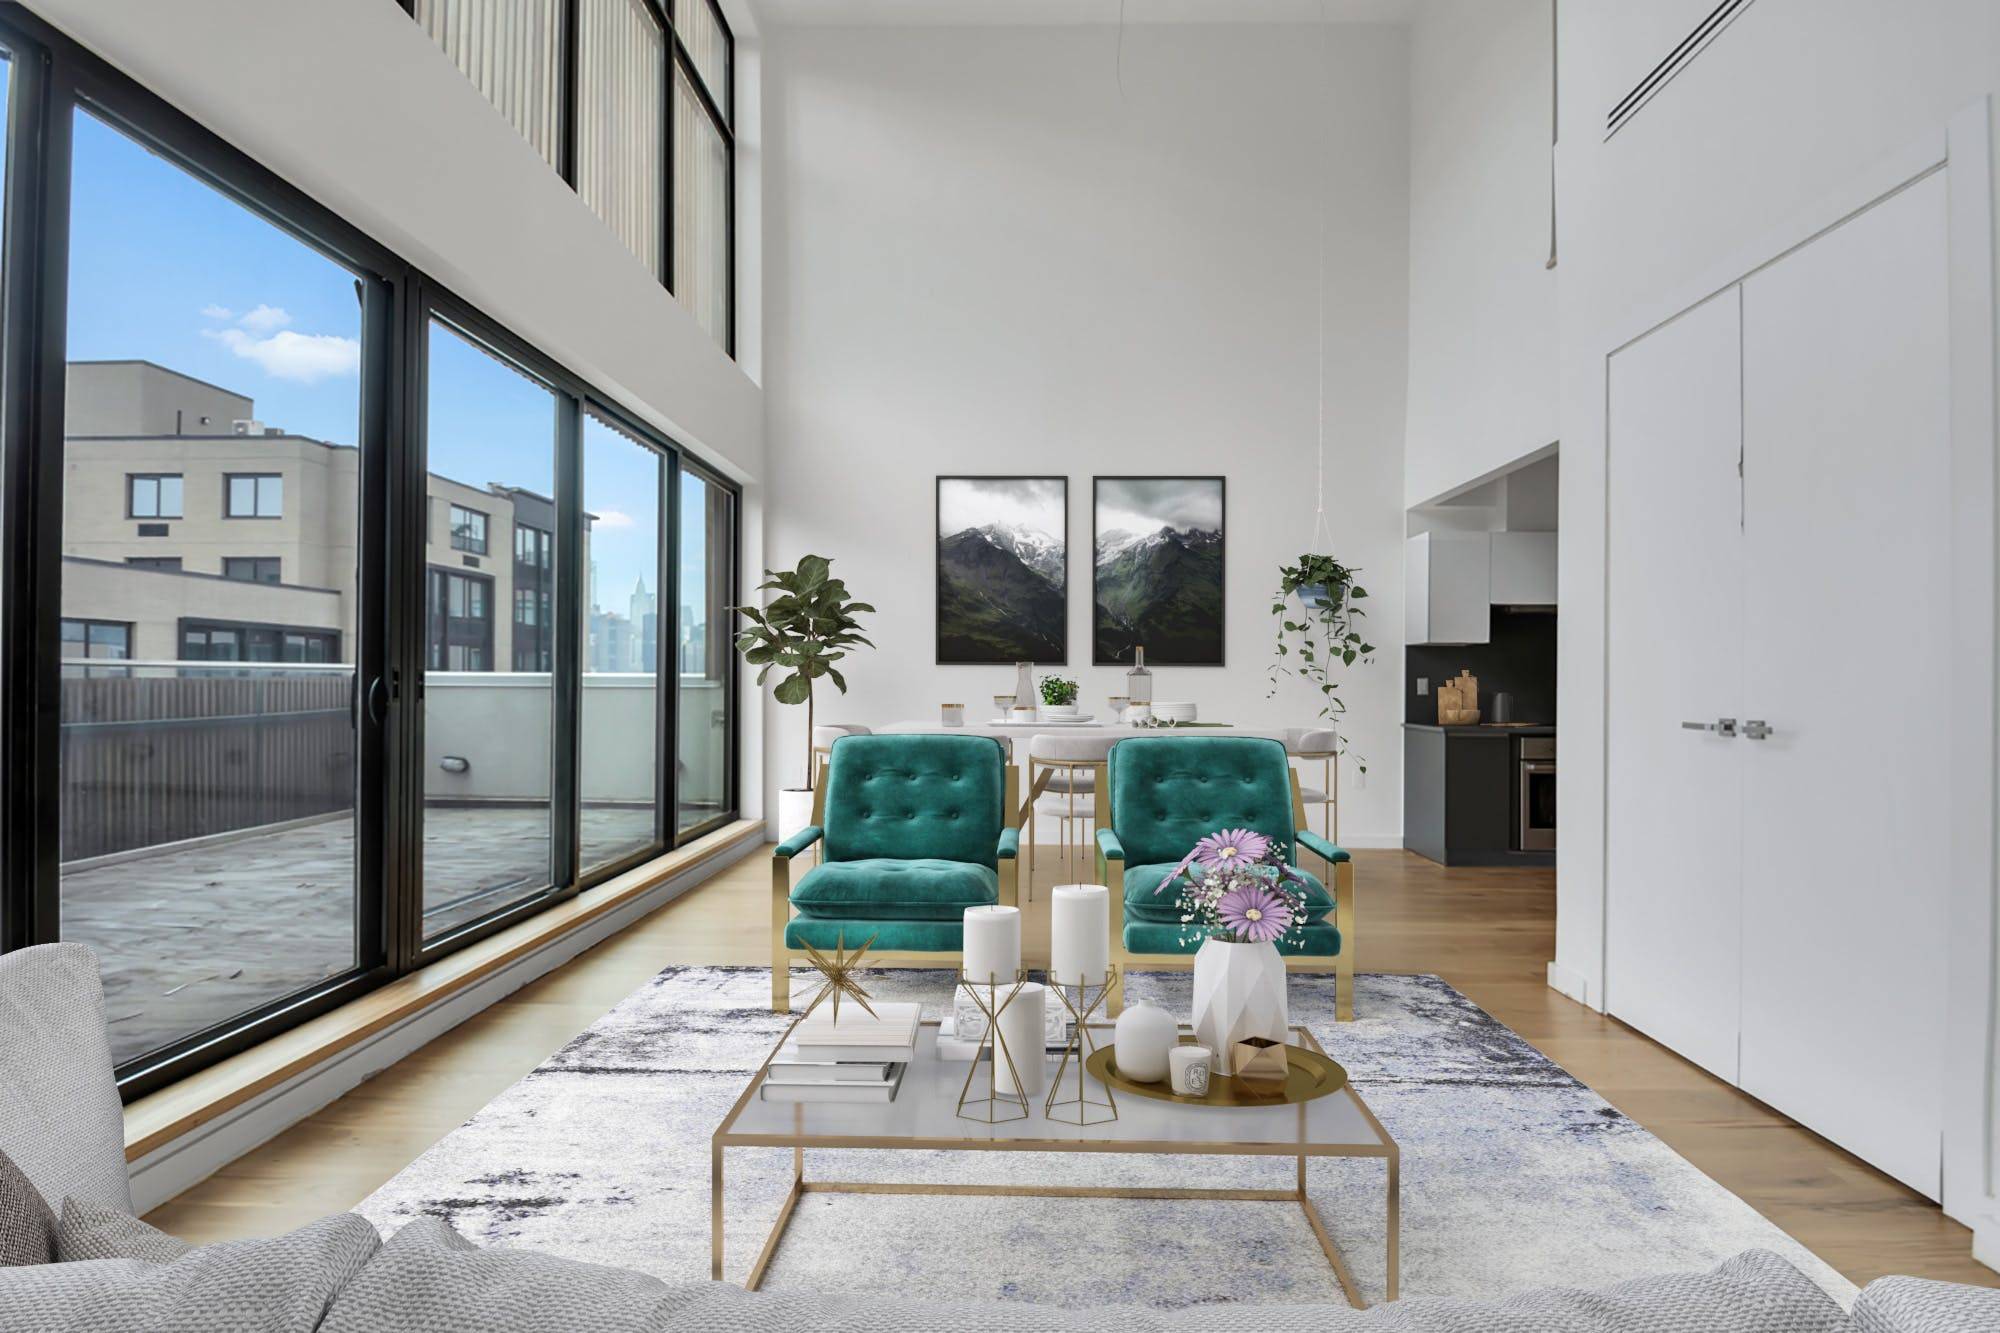 Showings begin June 15th Introducing the condominium residences at 148 West street ; an exclusive boutique condominium featuring five residences ; each one with private outdoor space.